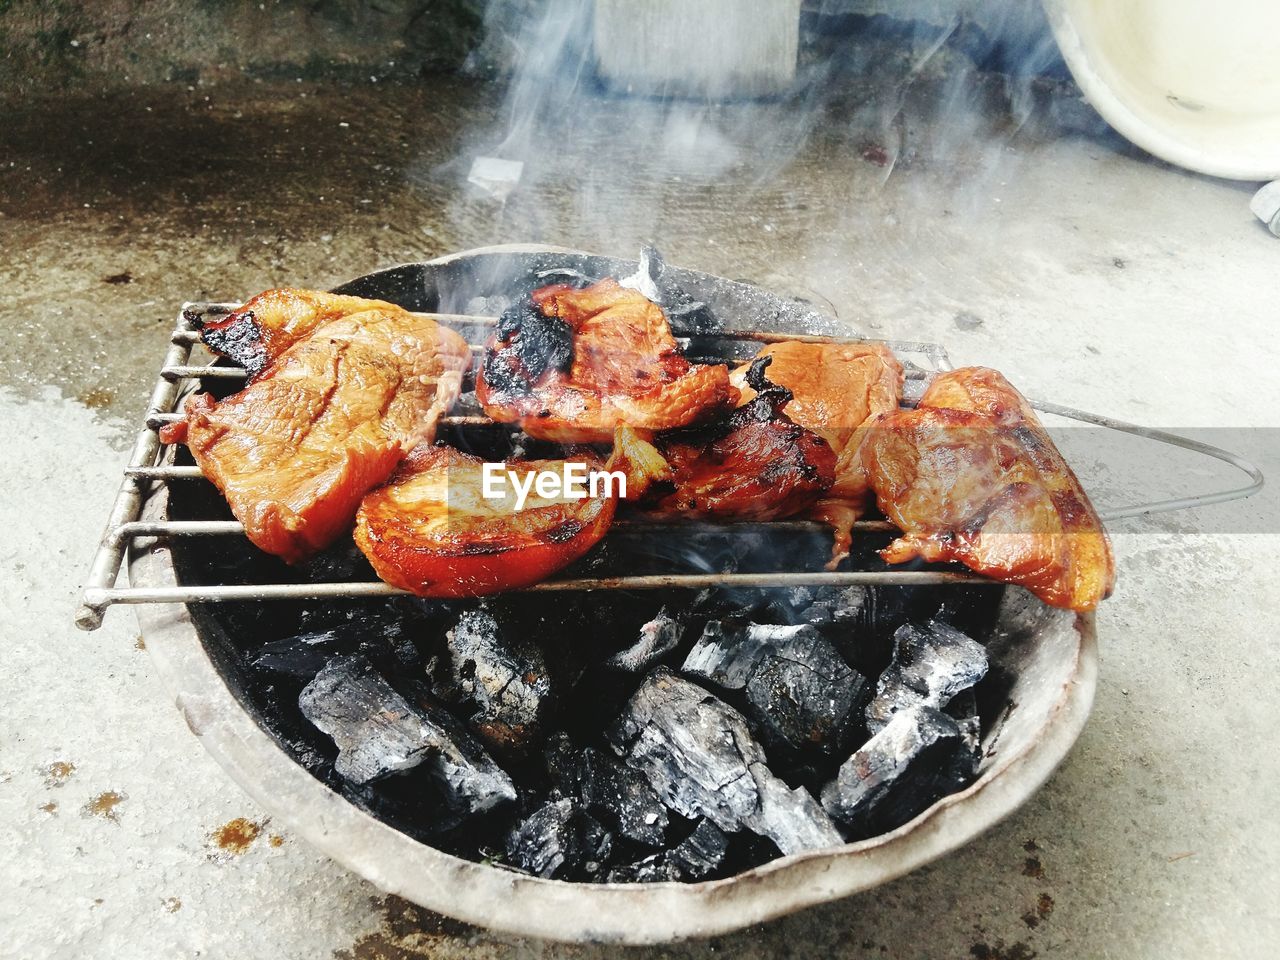 CLOSE-UP OF SEAFOOD ON BARBECUE GRILL